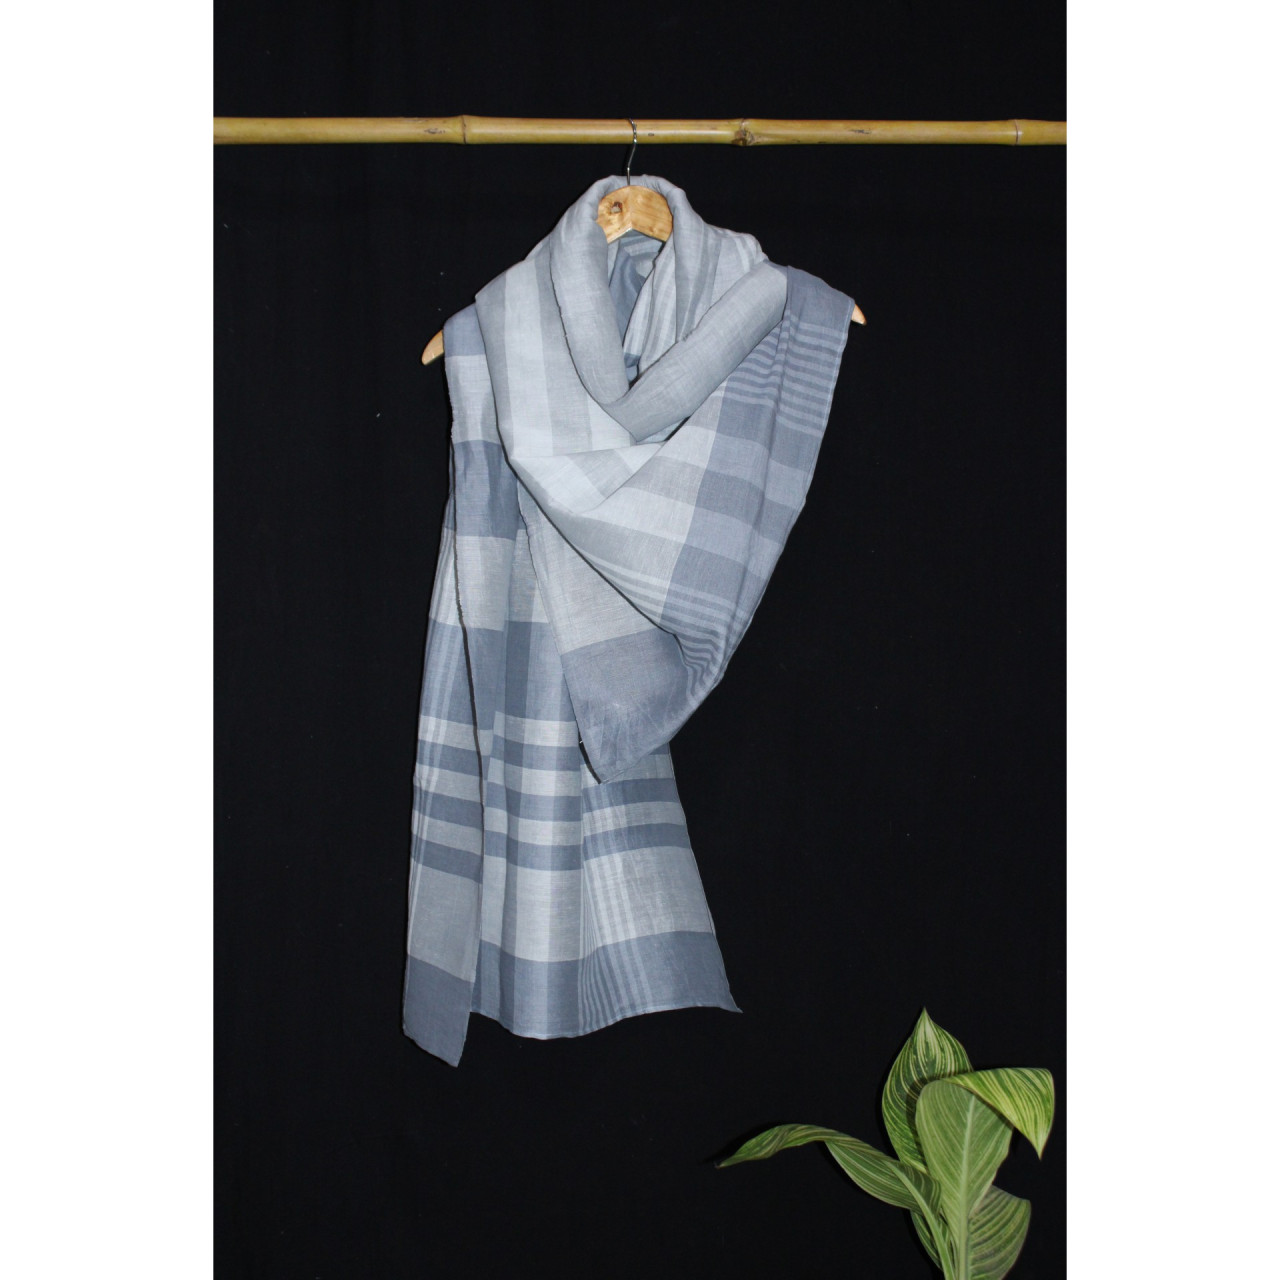 (2075) Khadi  and linen Azo-free dyed stole from Shantipur - Grey, white, stripes